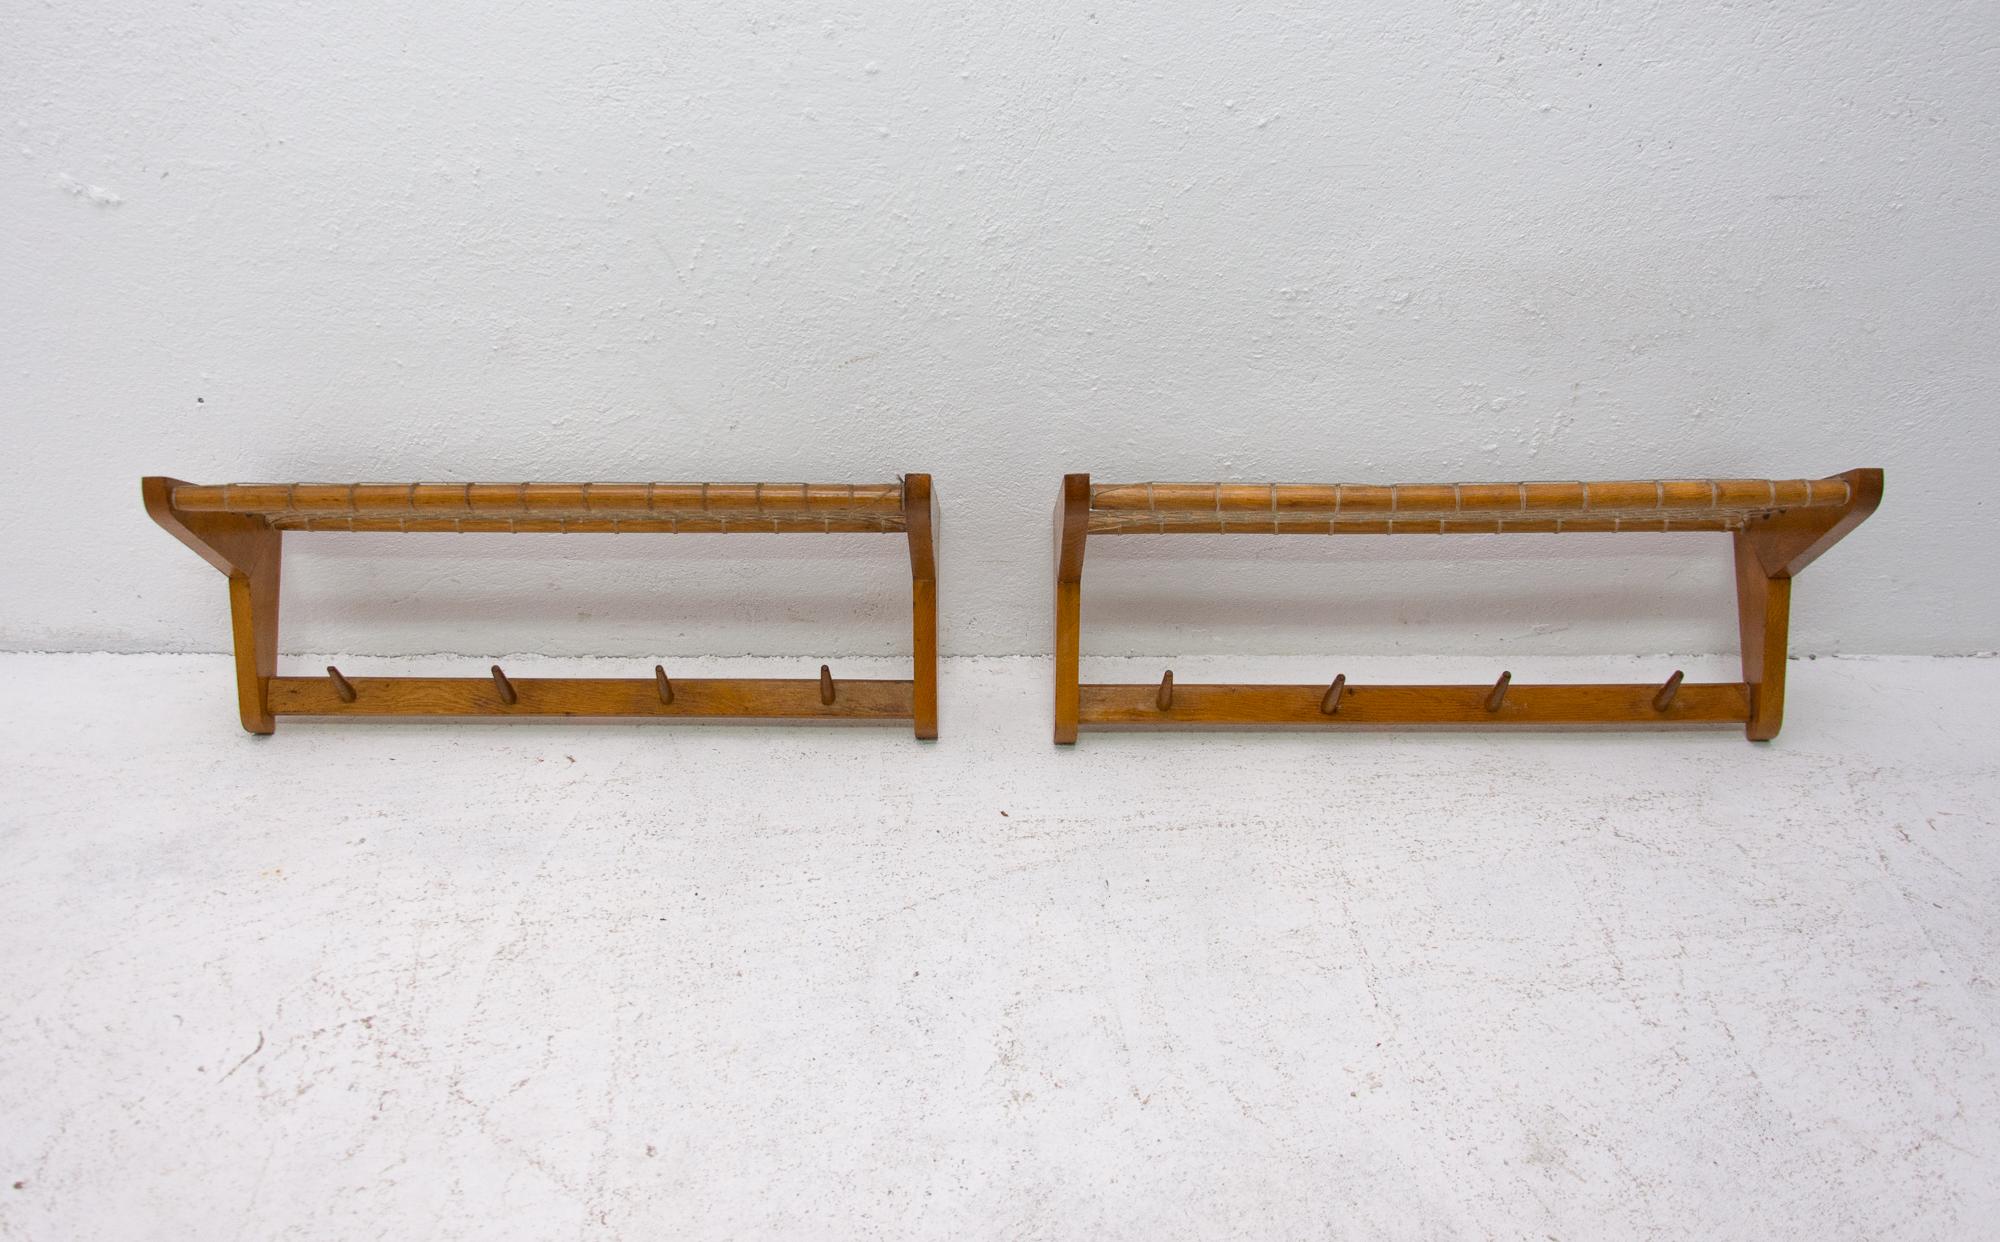 Pair of midcentury wall shelves, made in the former Czechoslovakia in the 1960s. It was produced by Krásná Jizba Company. It’s made of beechwood and an intertwined upper part. In very good vintage condition. Price is for the pair.